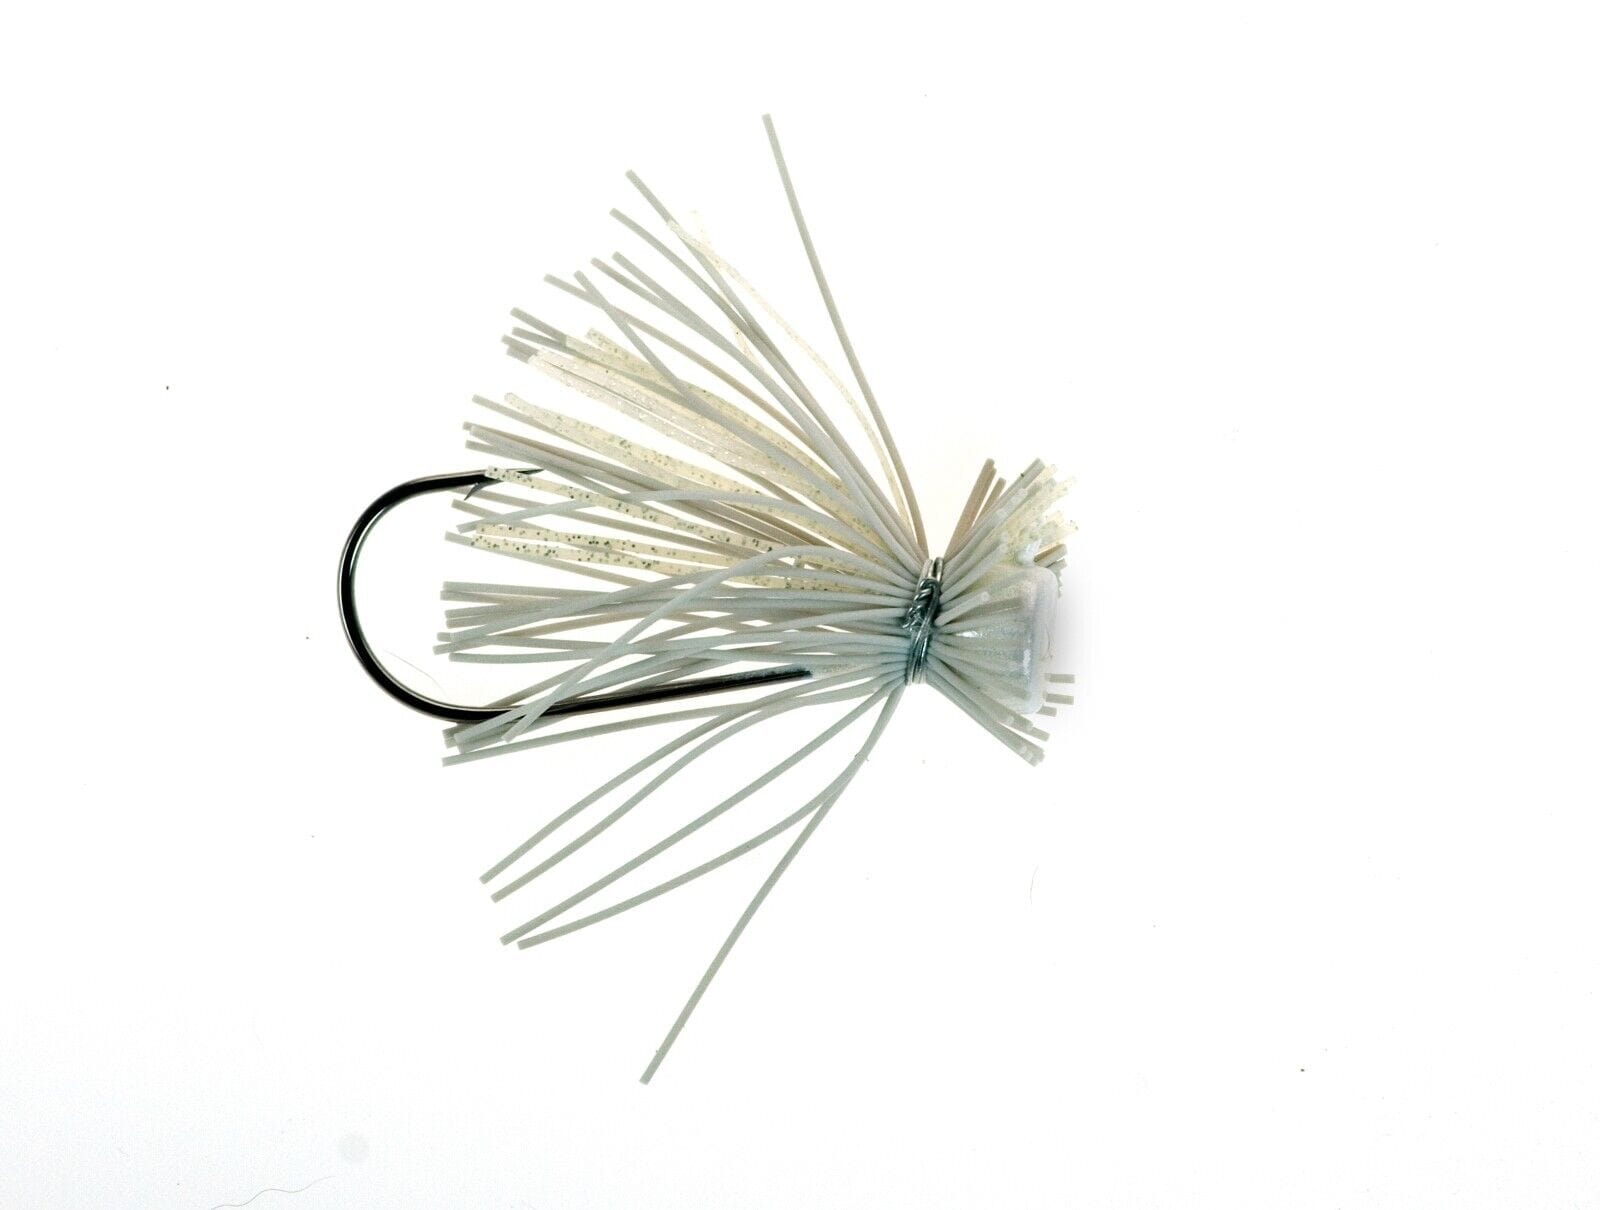 Buckeye Lures Spot Remover Finesse Jigs